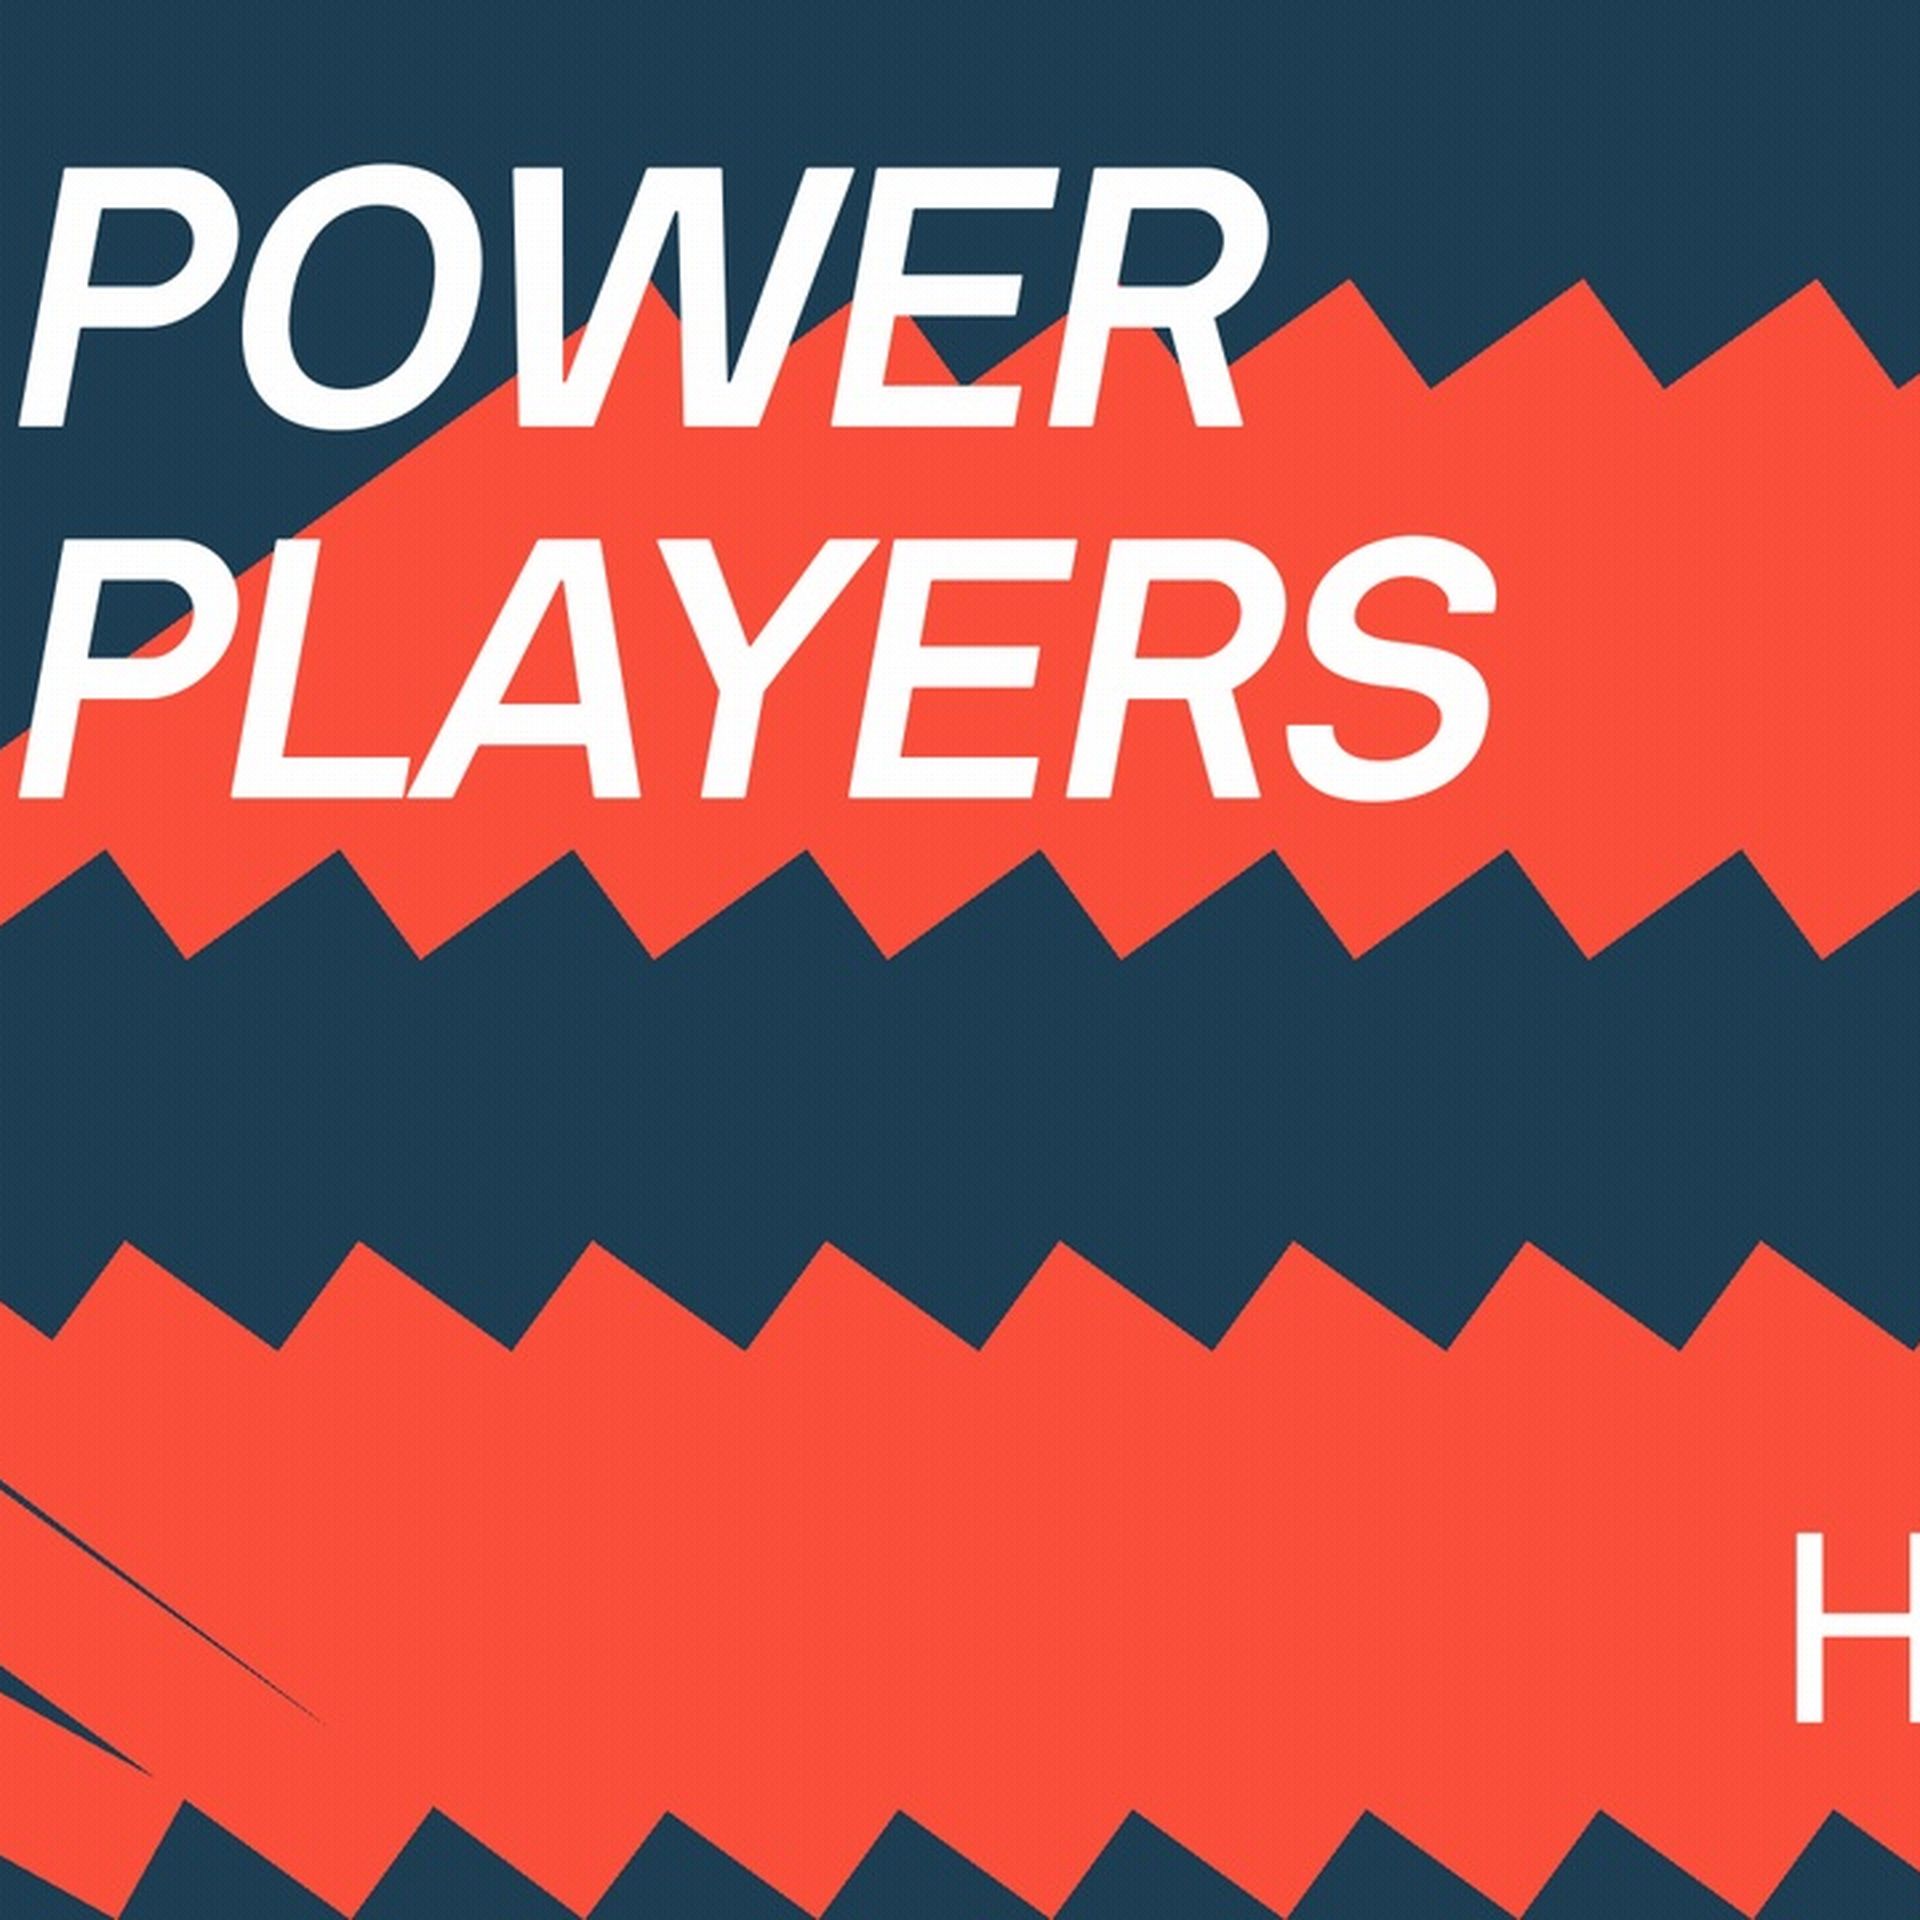 Hemmelighed Retouch Idol Axios Power Players: Lina Hidalgo, Chris Canetti, William McKeon and more -  Axios Houston